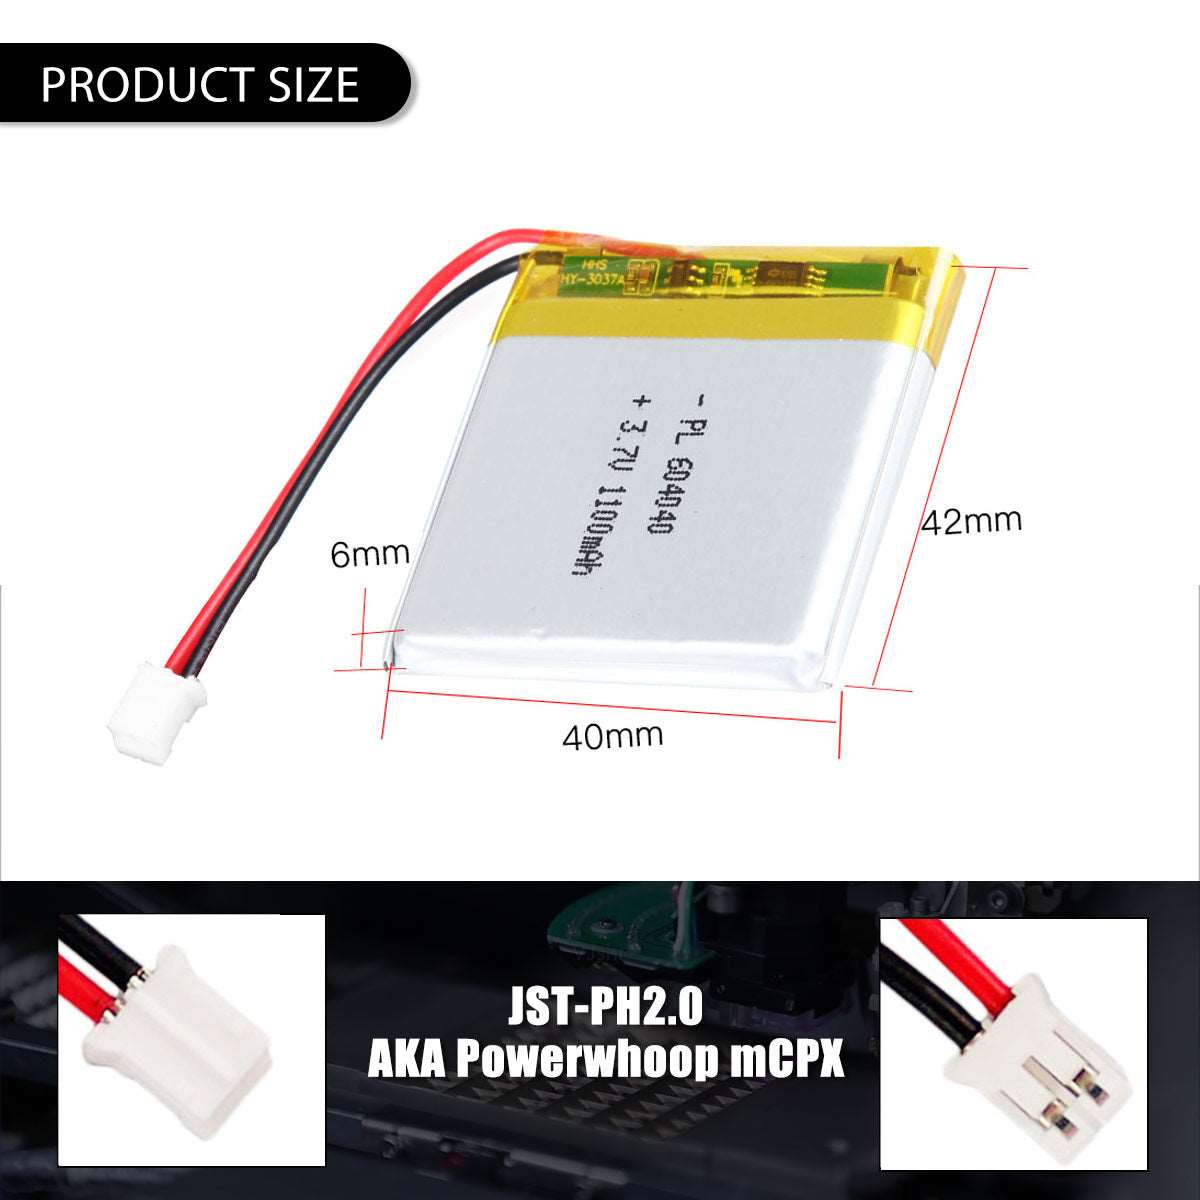 US free ship 3.7V 1100mAh 604040 Rechargeable Lithium Polymer ion Battery Pack